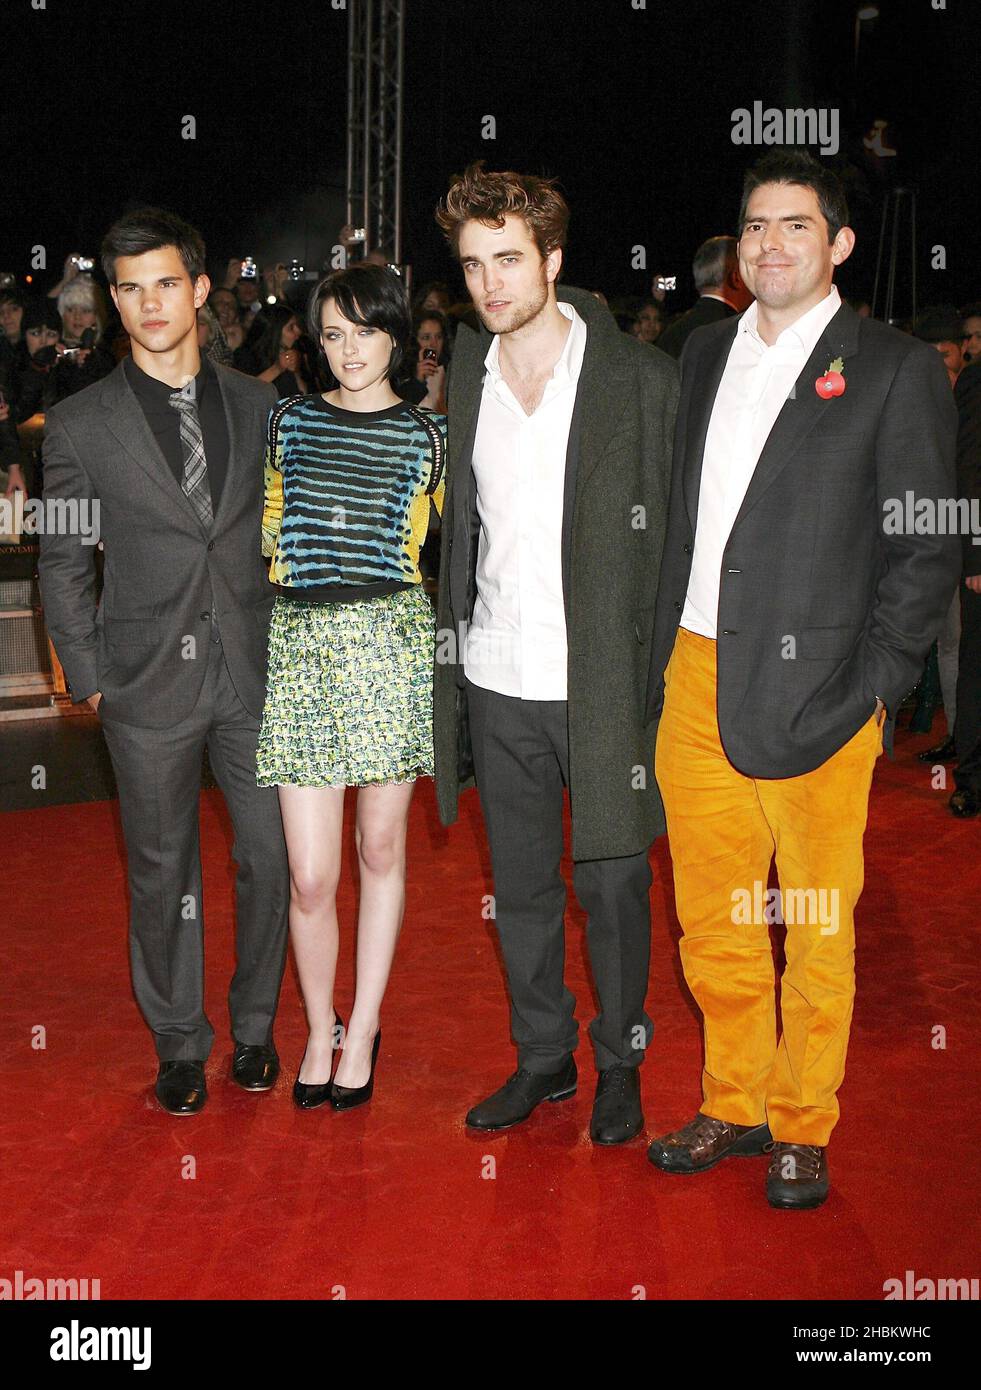 Taylor Lautner, Kristen Stewart, Robert Pattinson and Chris White arrive at the UK Fan Party of The Twilight Saga: New Moon at the Battersea Evolution, London Stock Photo